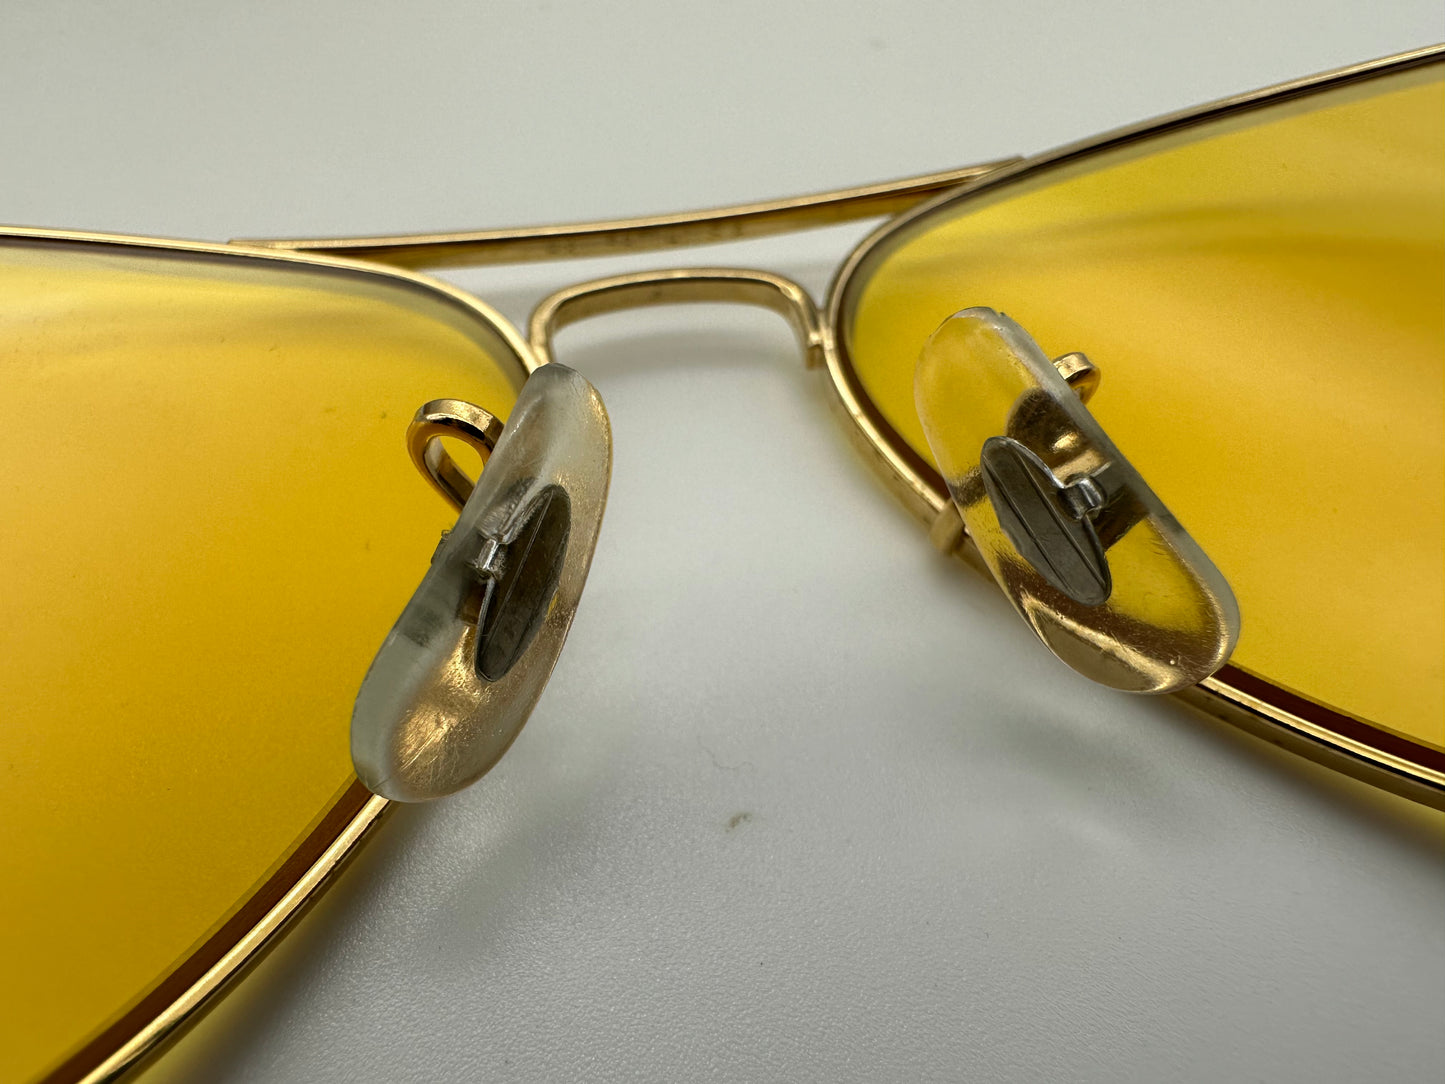 Bausch & Lomb Ray Ban 58-14 Aviator Gold Ambermatic Vintage 1970s NOS READ